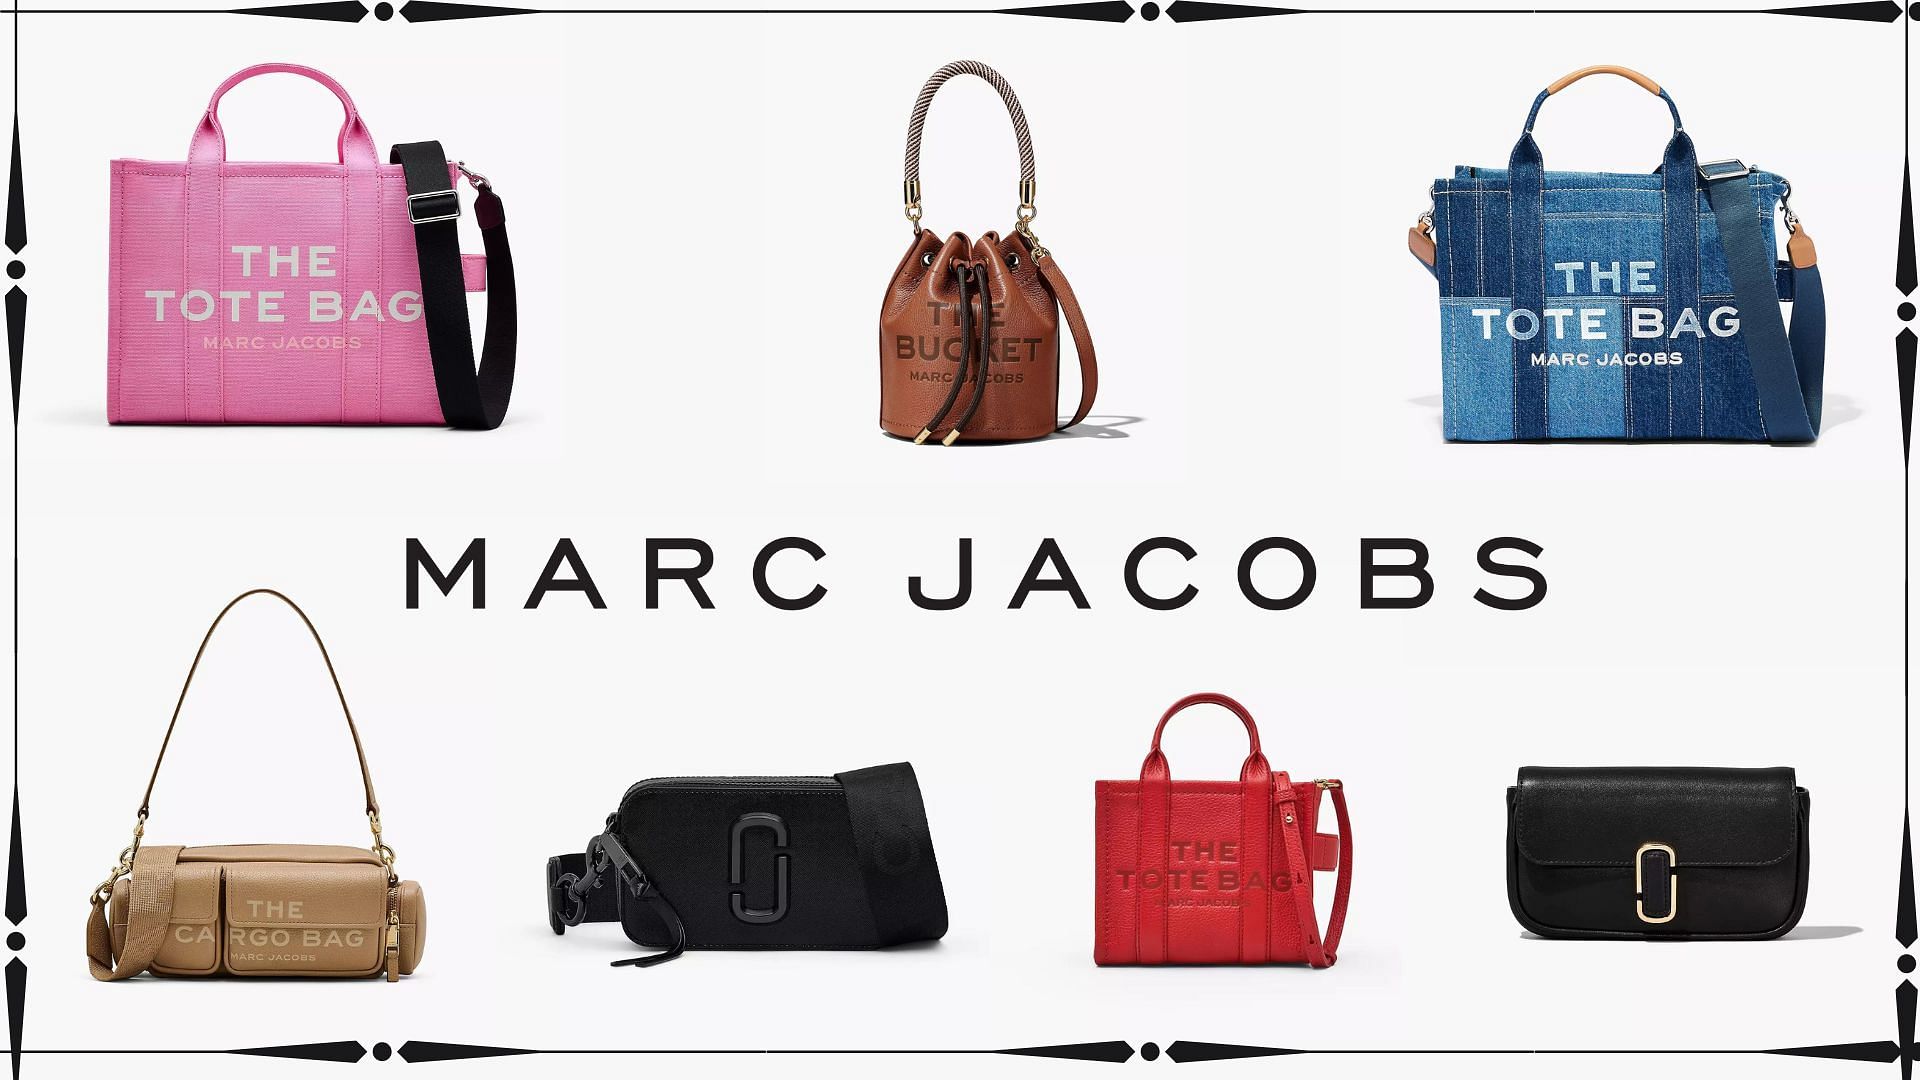 best marc jacobs bags: 7 Best Marc Jacobs bags to add into your